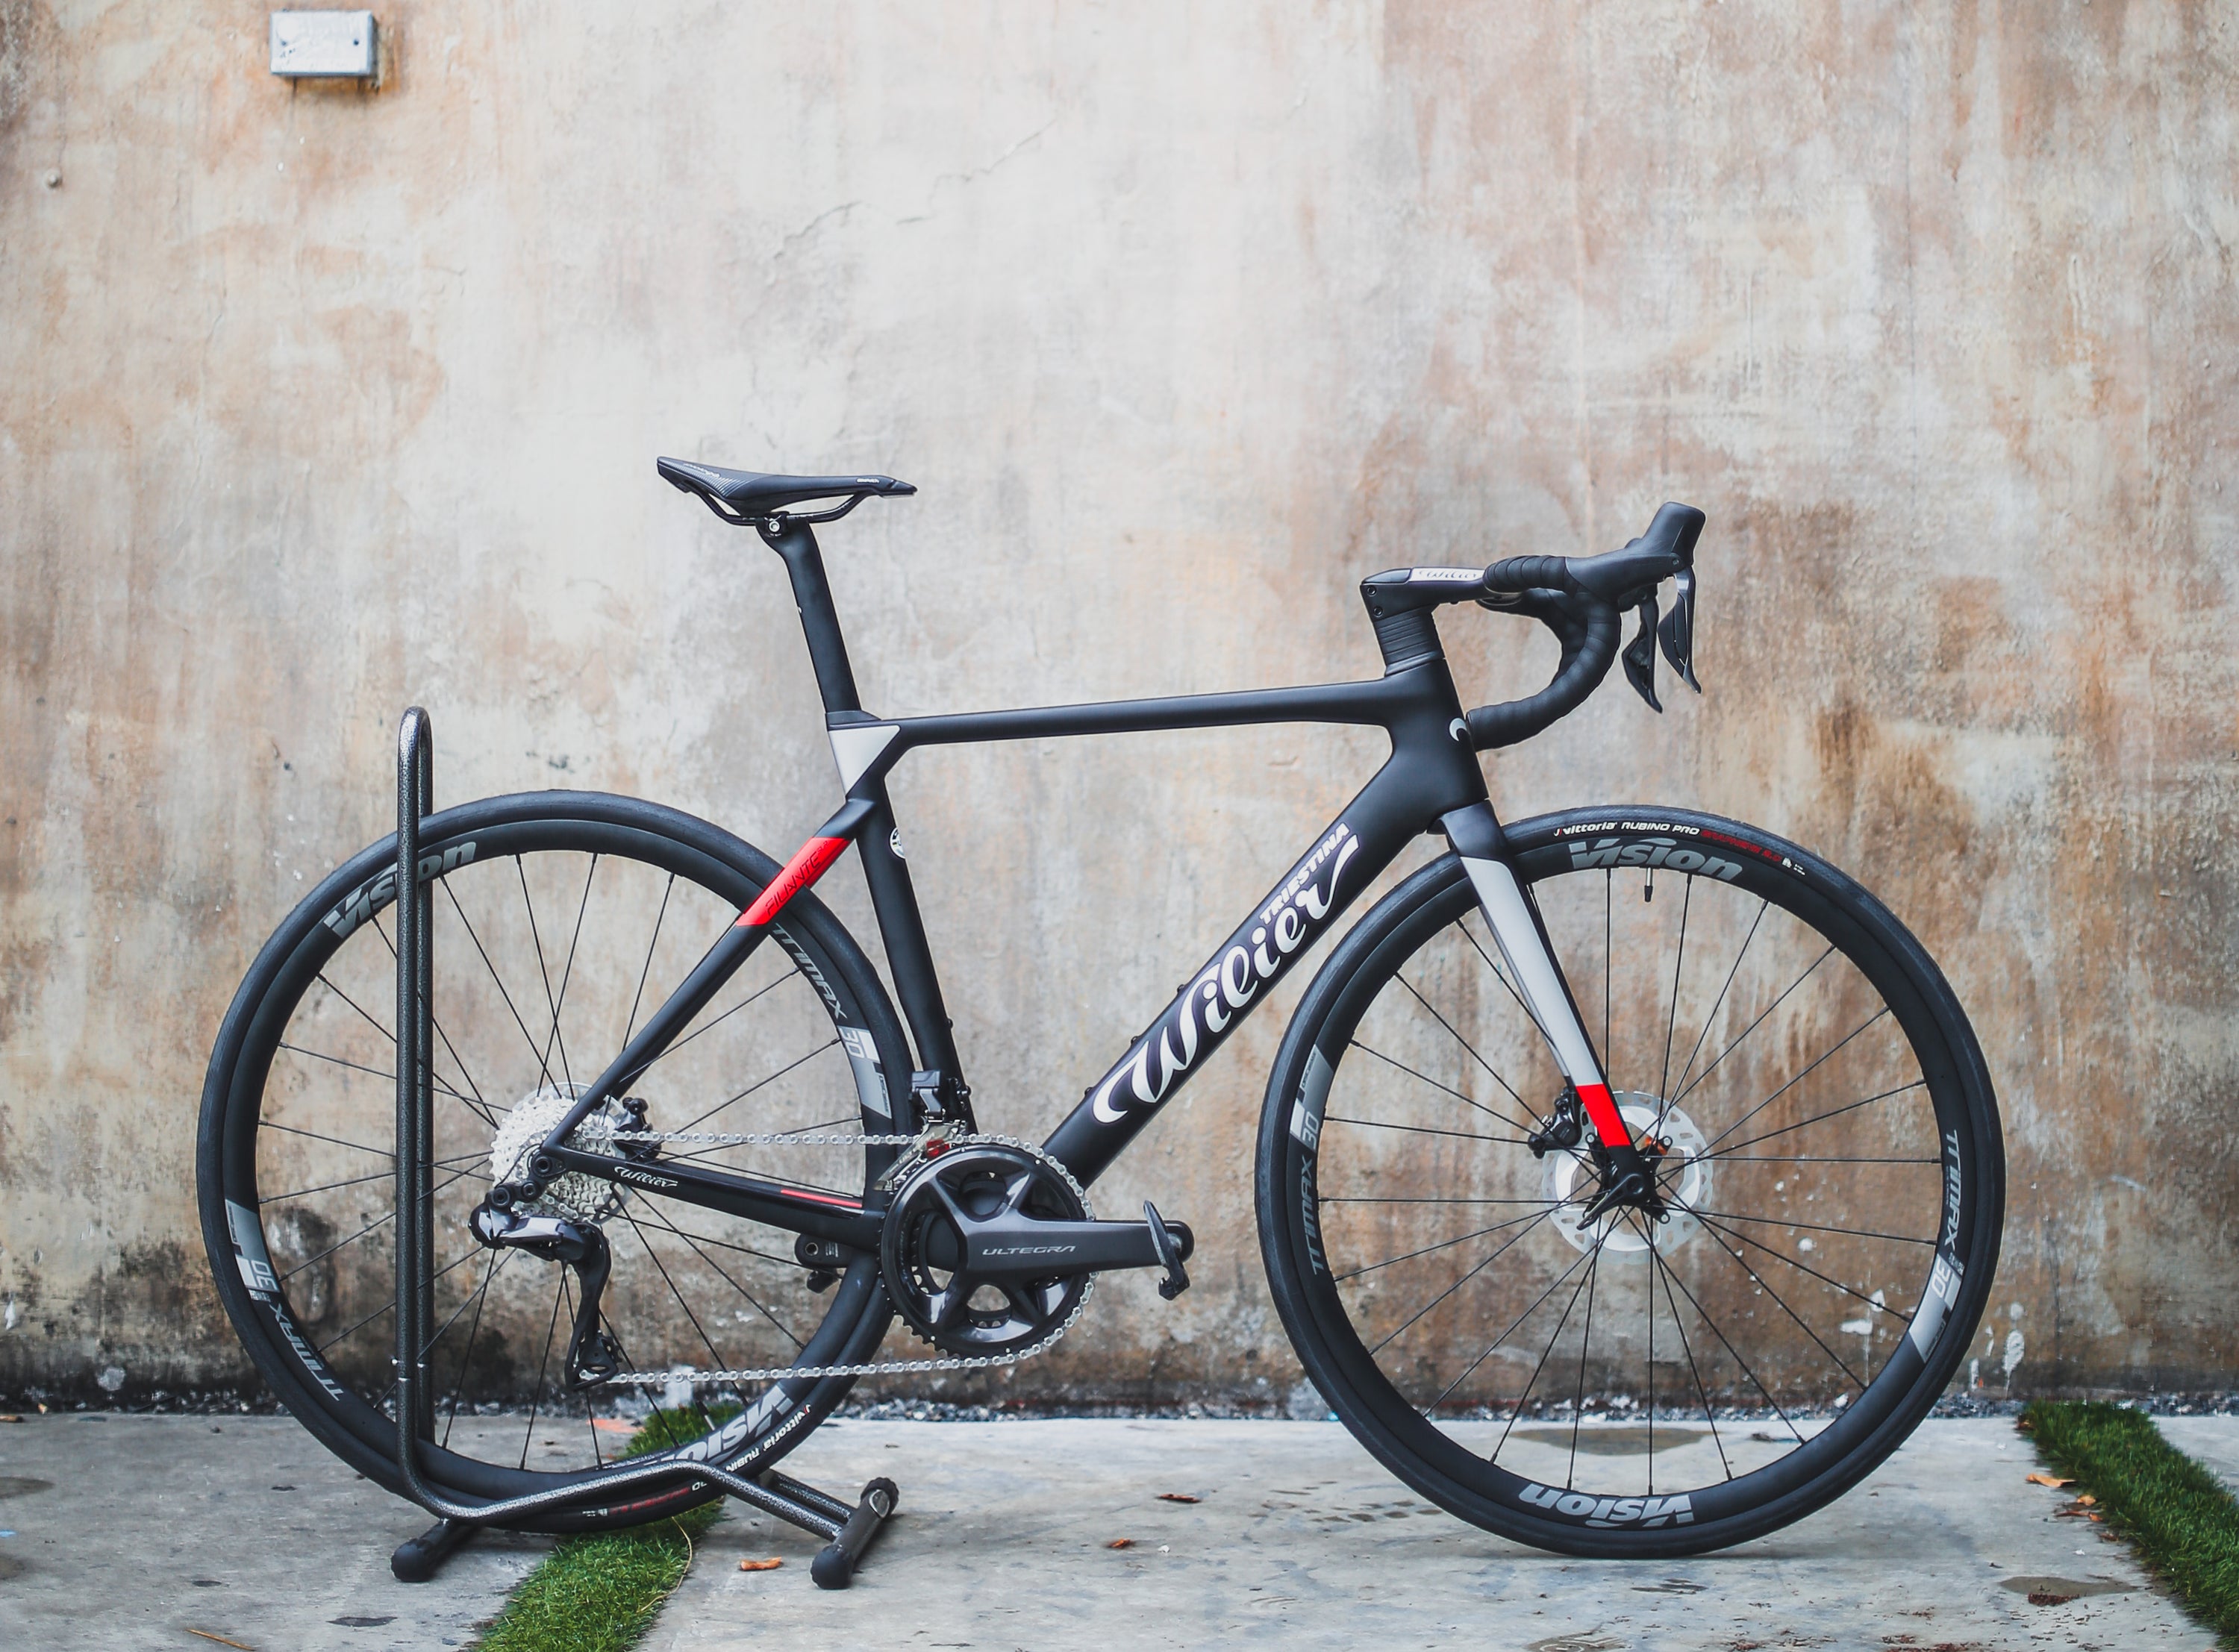 BlackHeart vs Wilier - What You Should Know When Bike Shopping